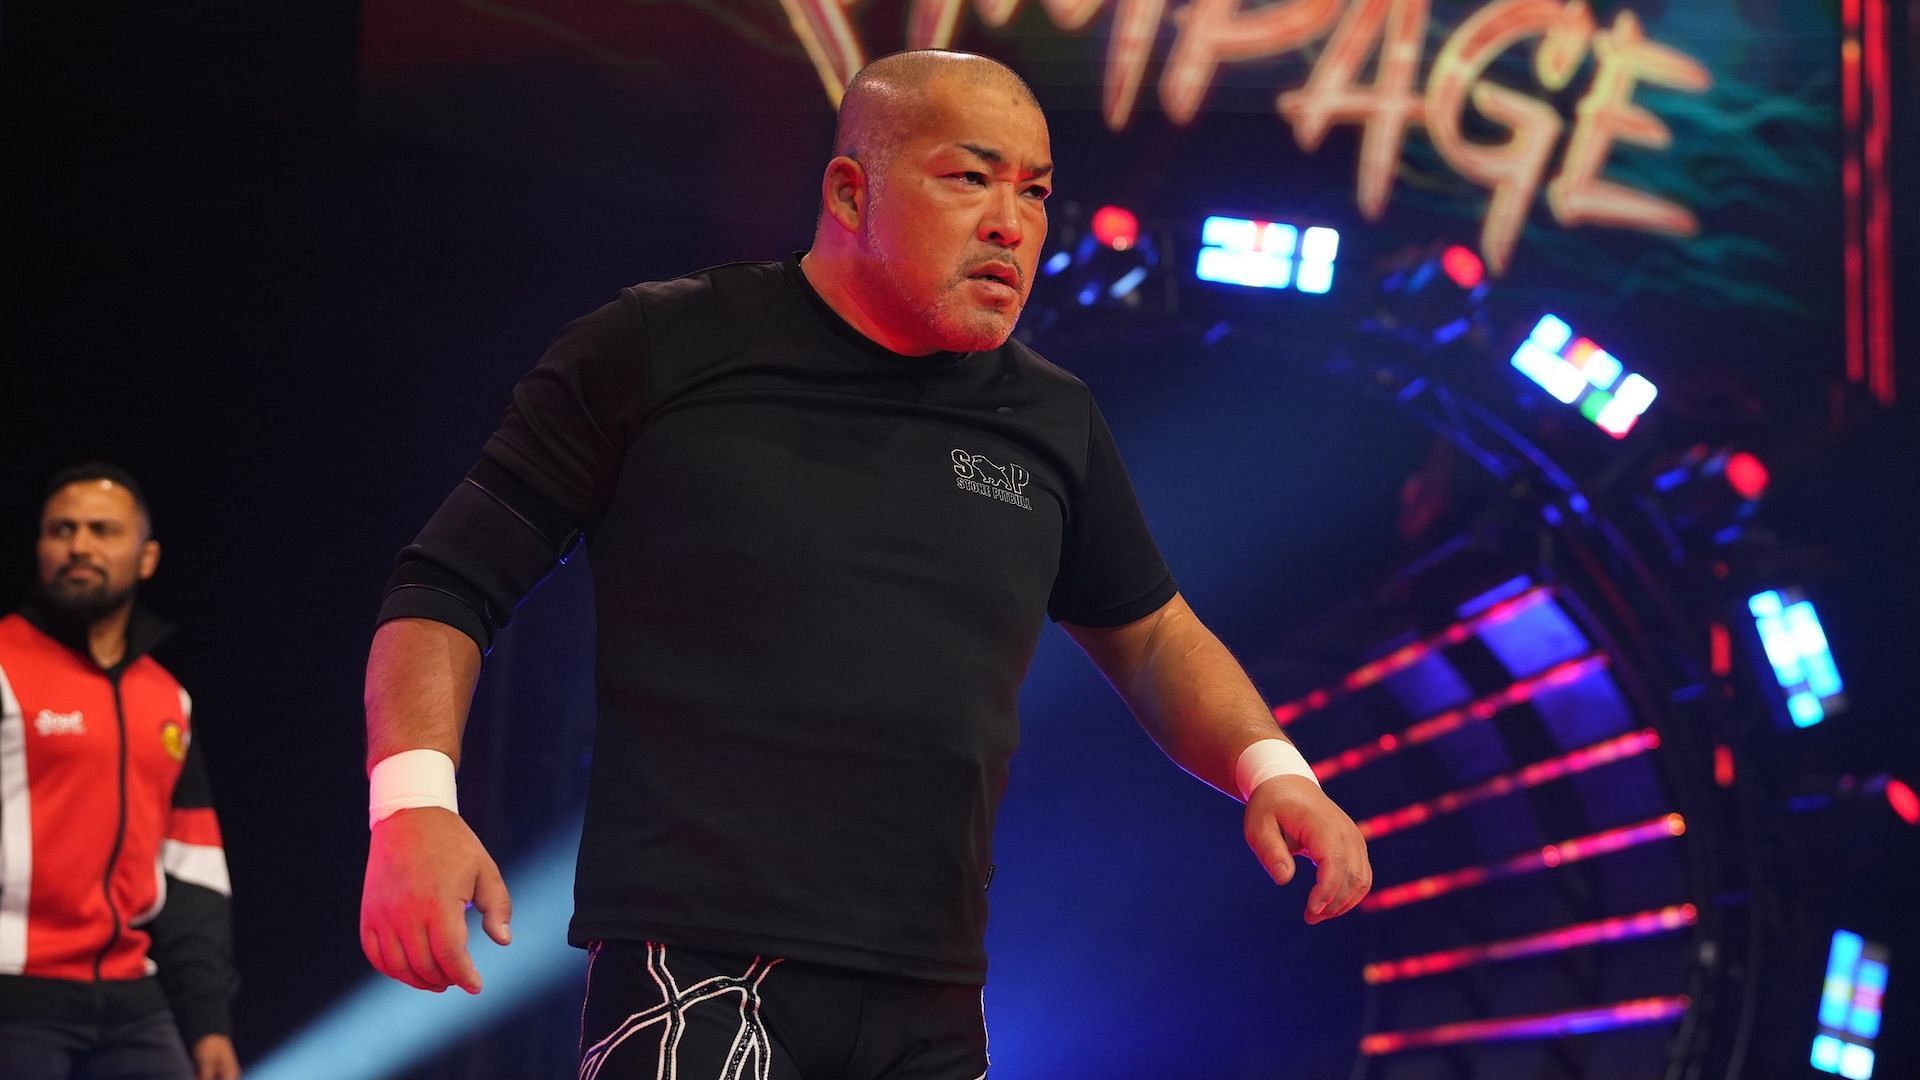 Ishii missed out on the All-Atlantic Title match at Forbidden Door.